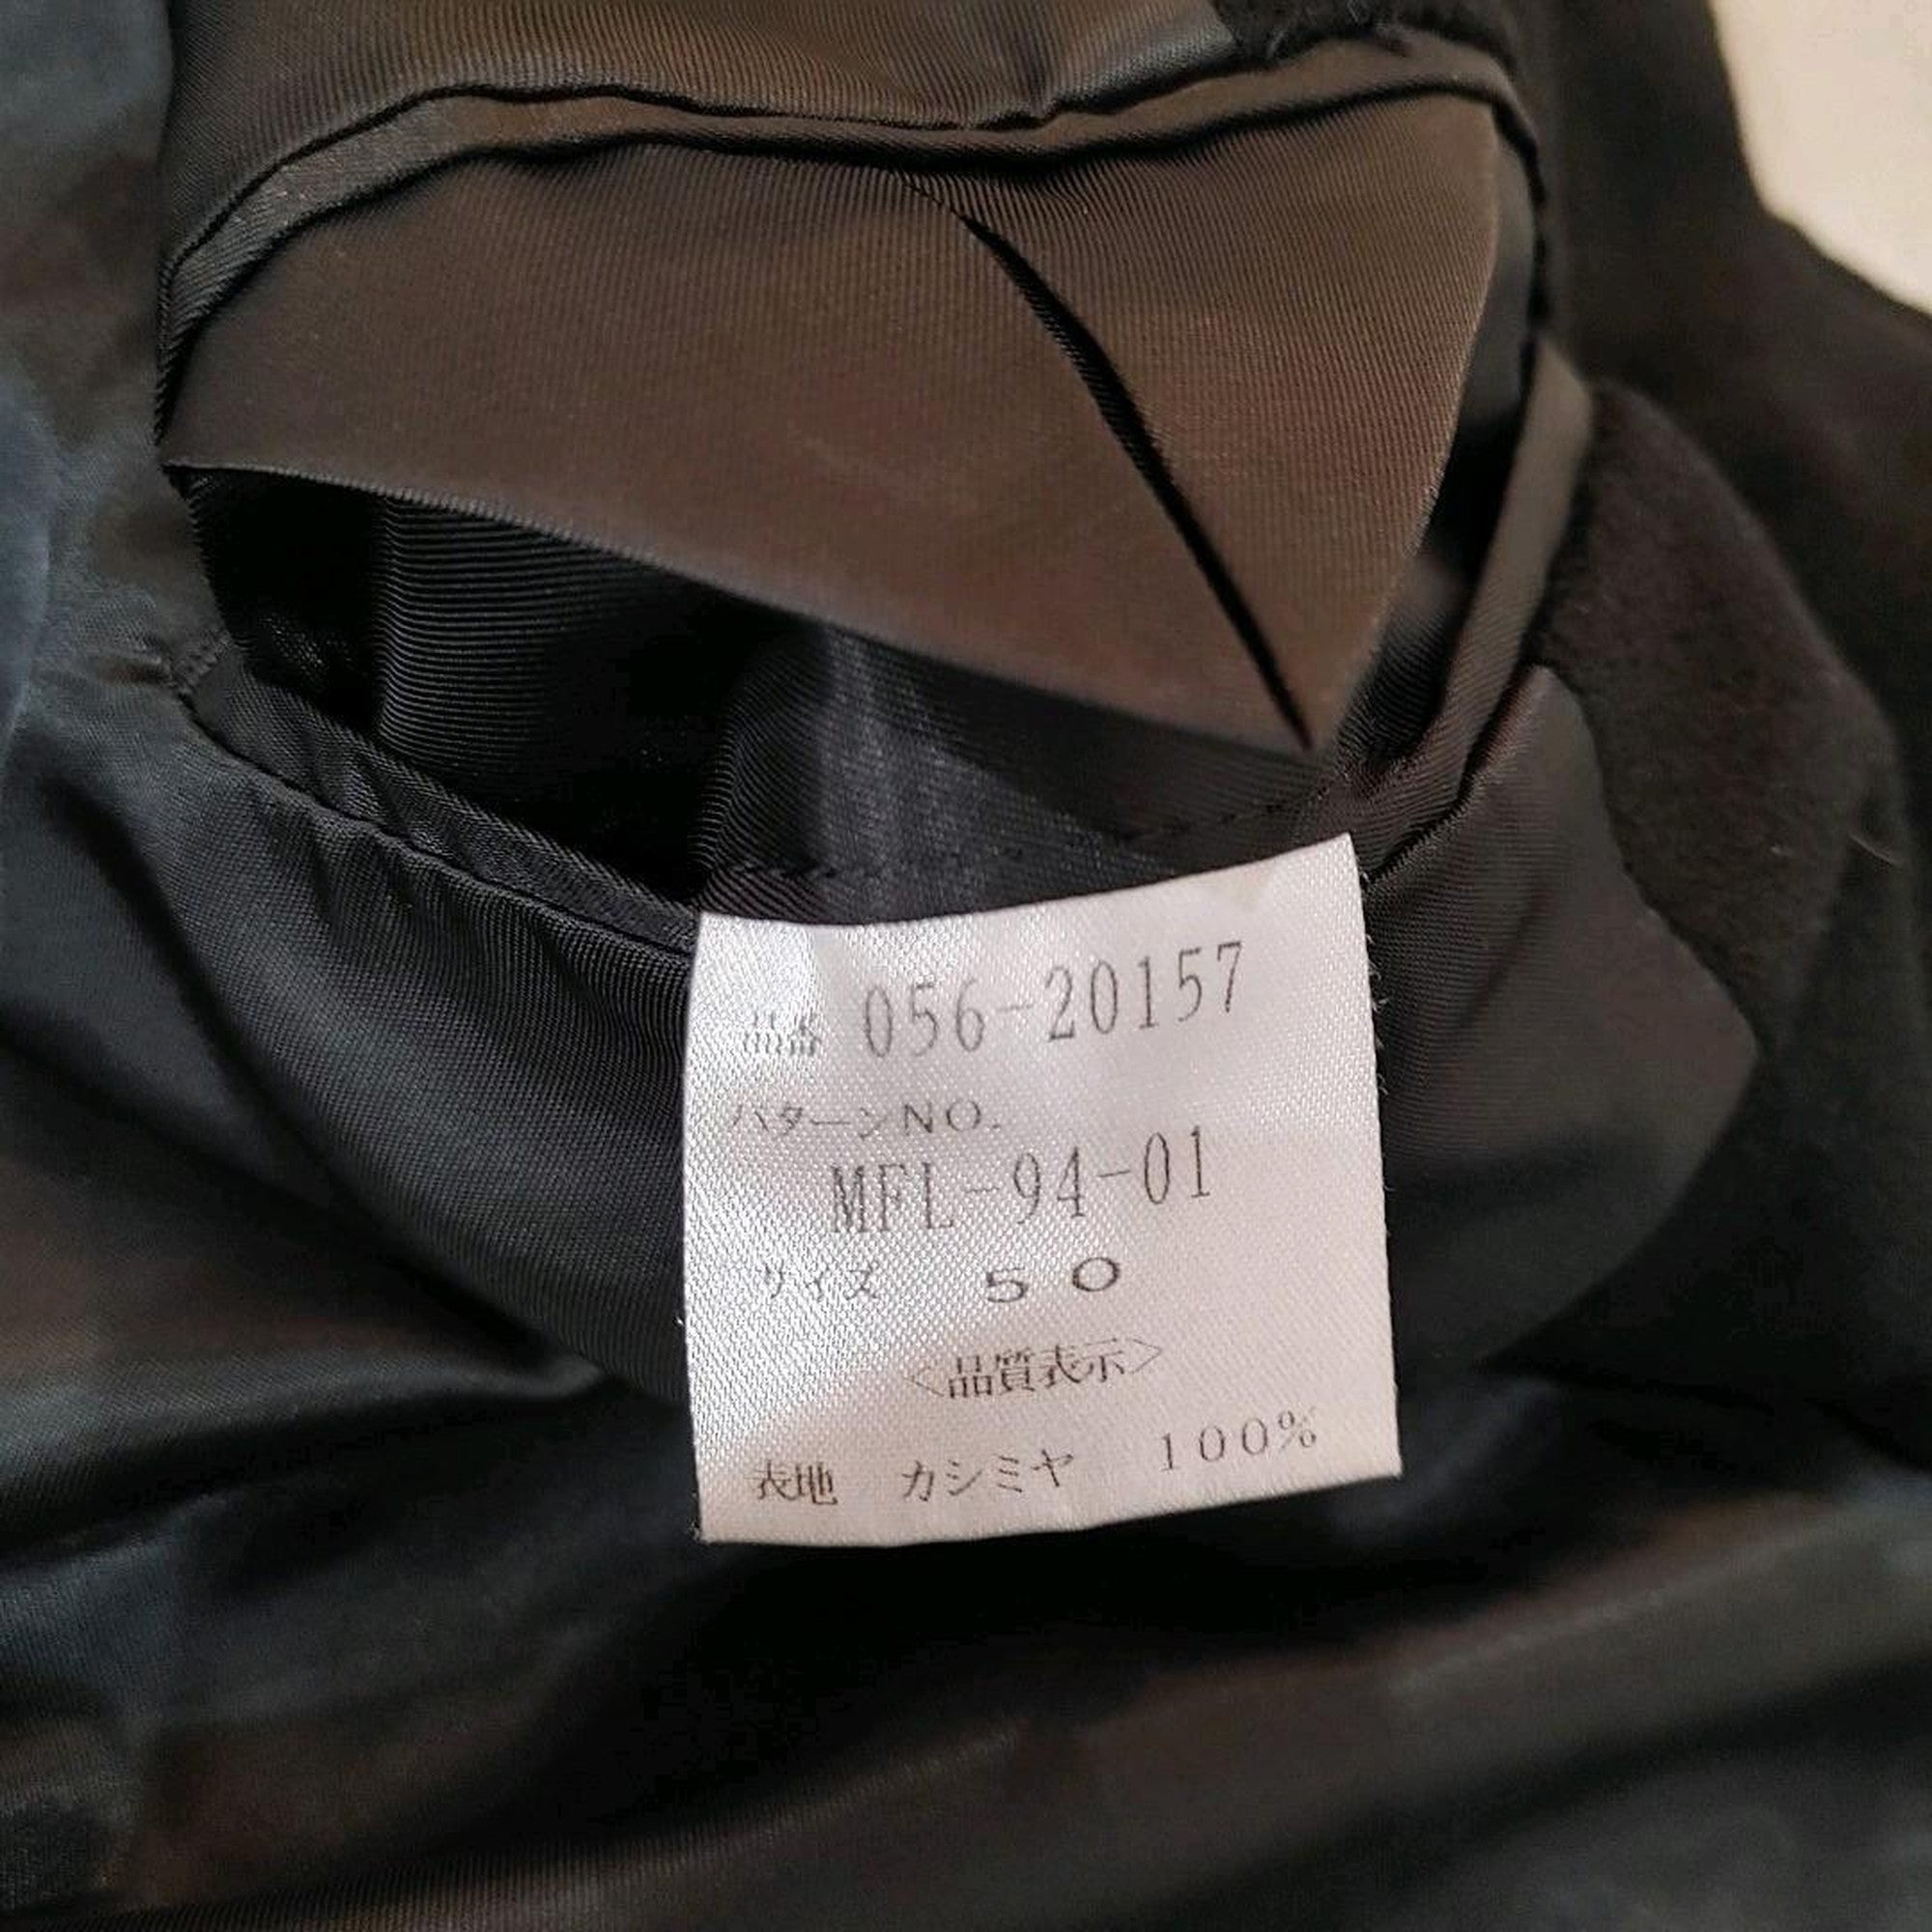 OLD Cashimire100% Chester coat XL